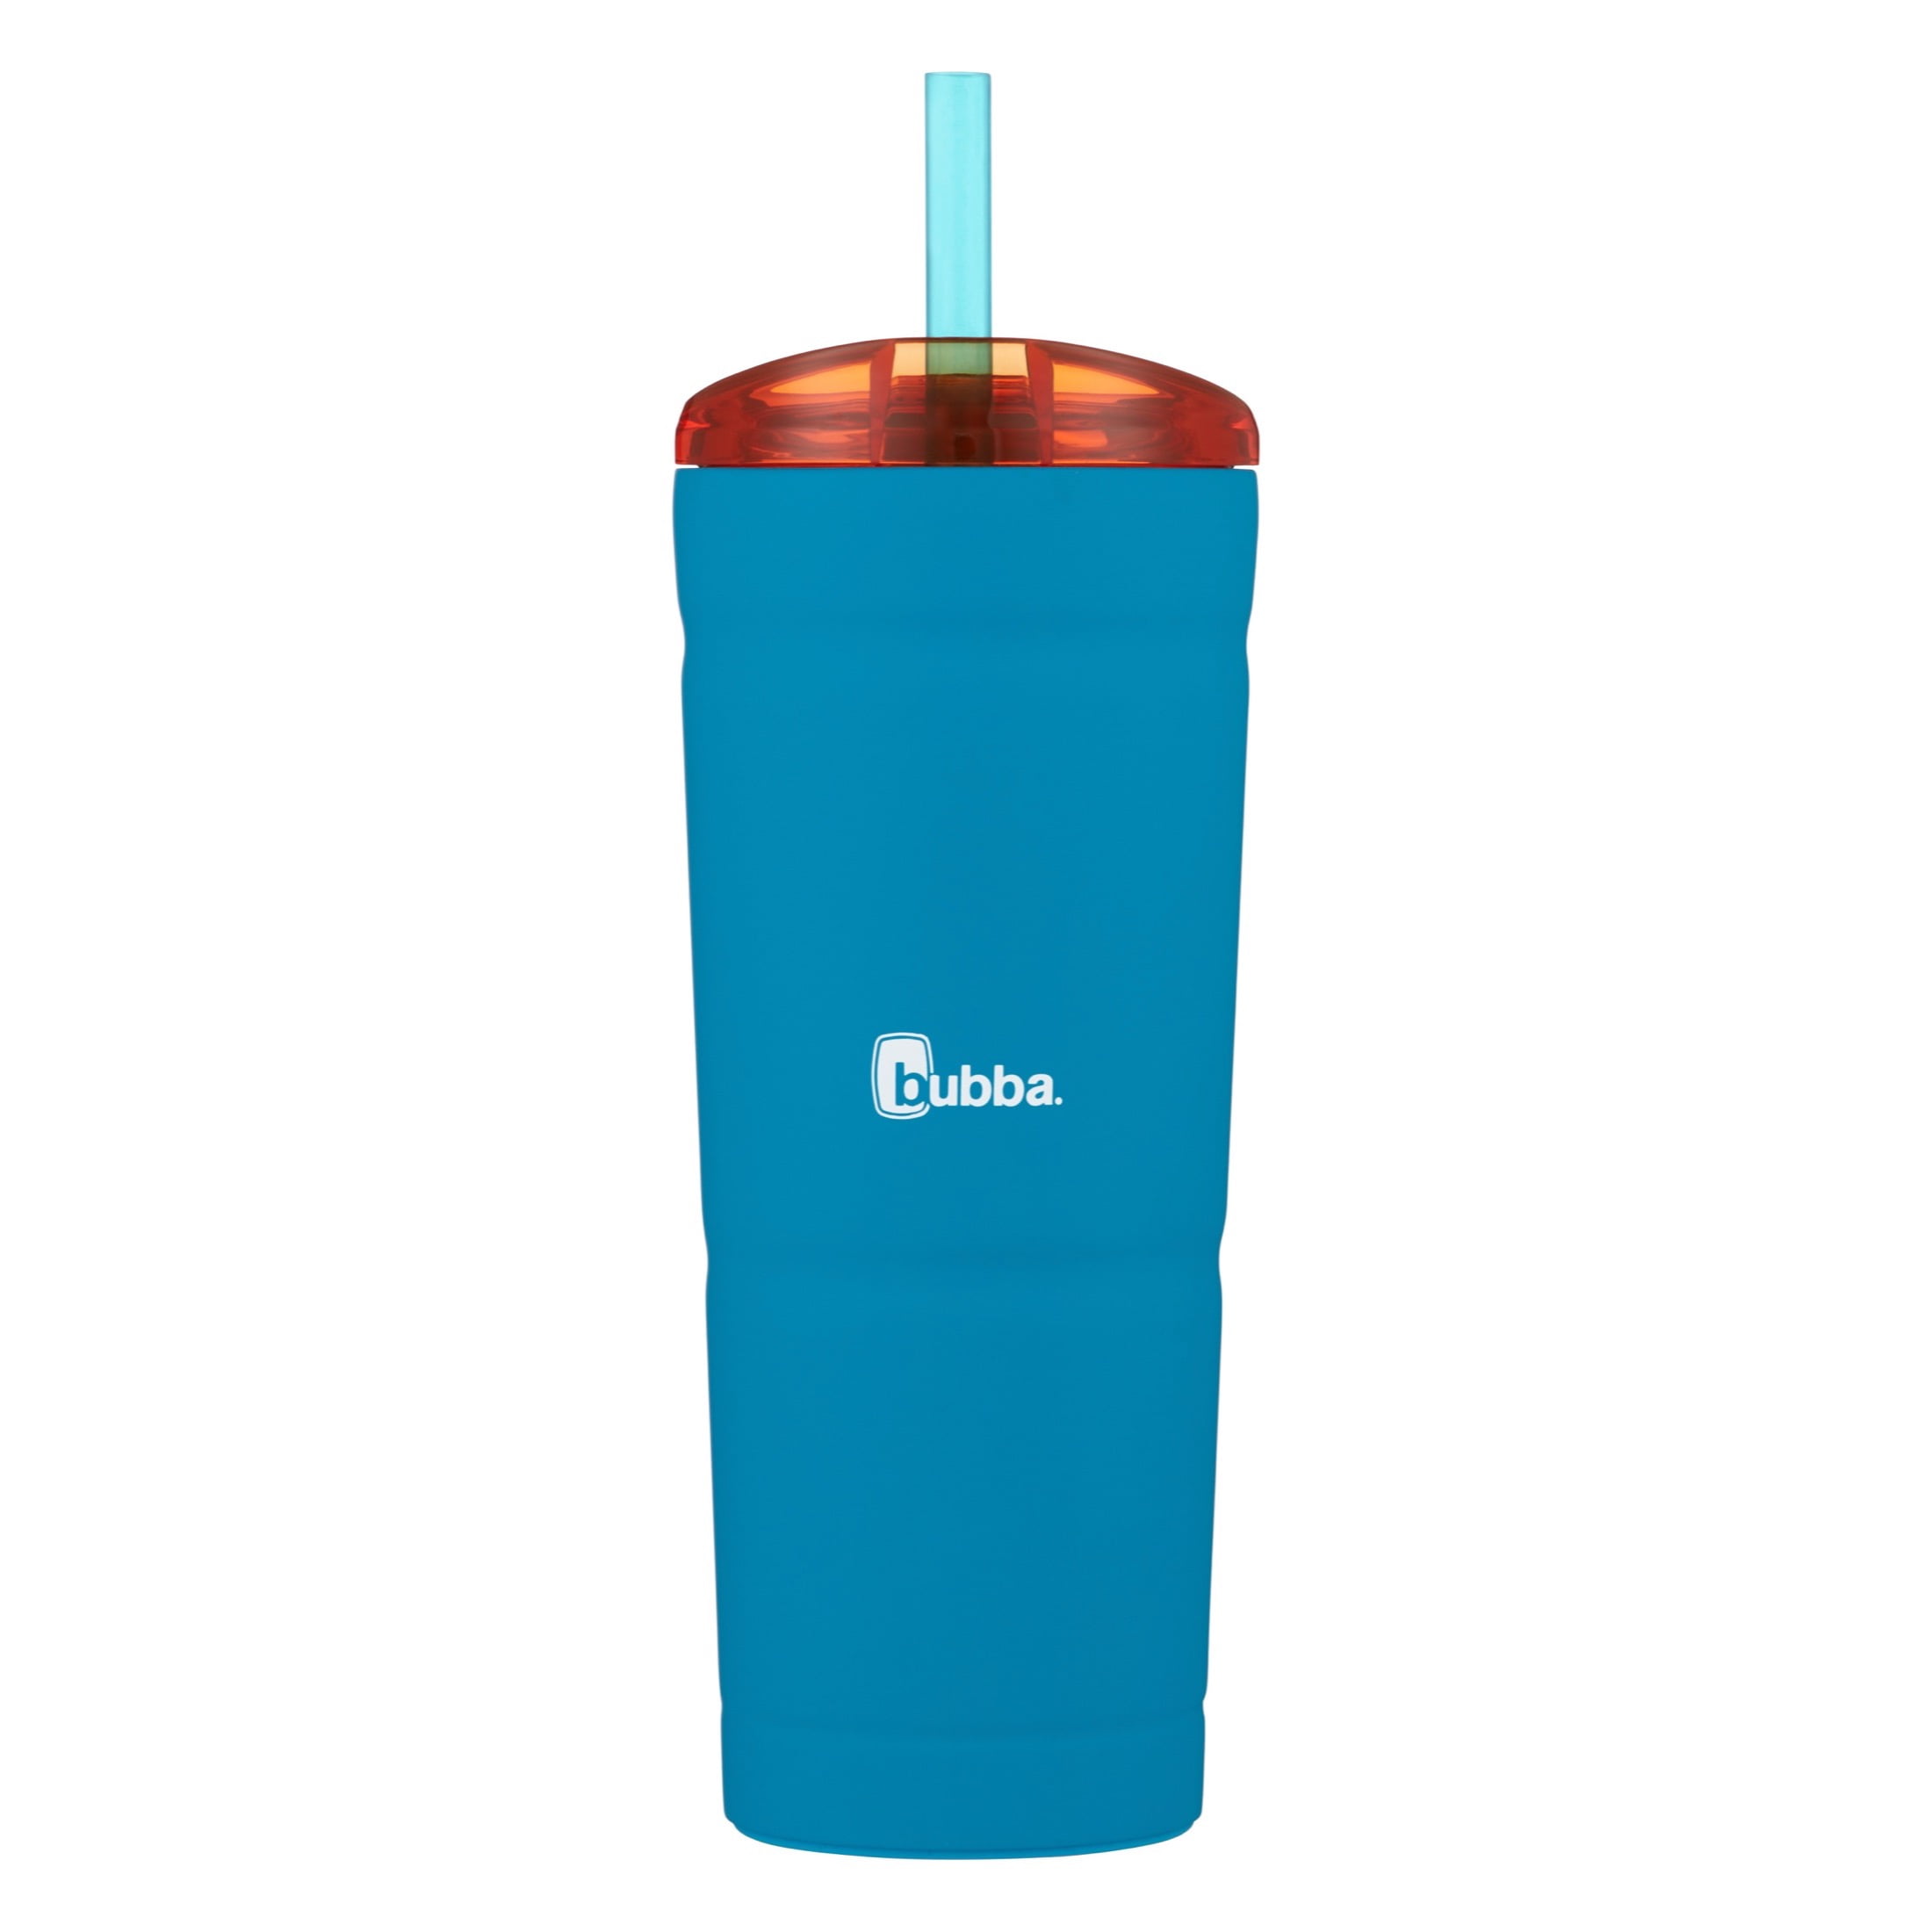 Bubba Envy S Stainless Steel Tumbler with Straw and Bumper Iridescent Island Teal, 24 fl oz., Size: 24oz